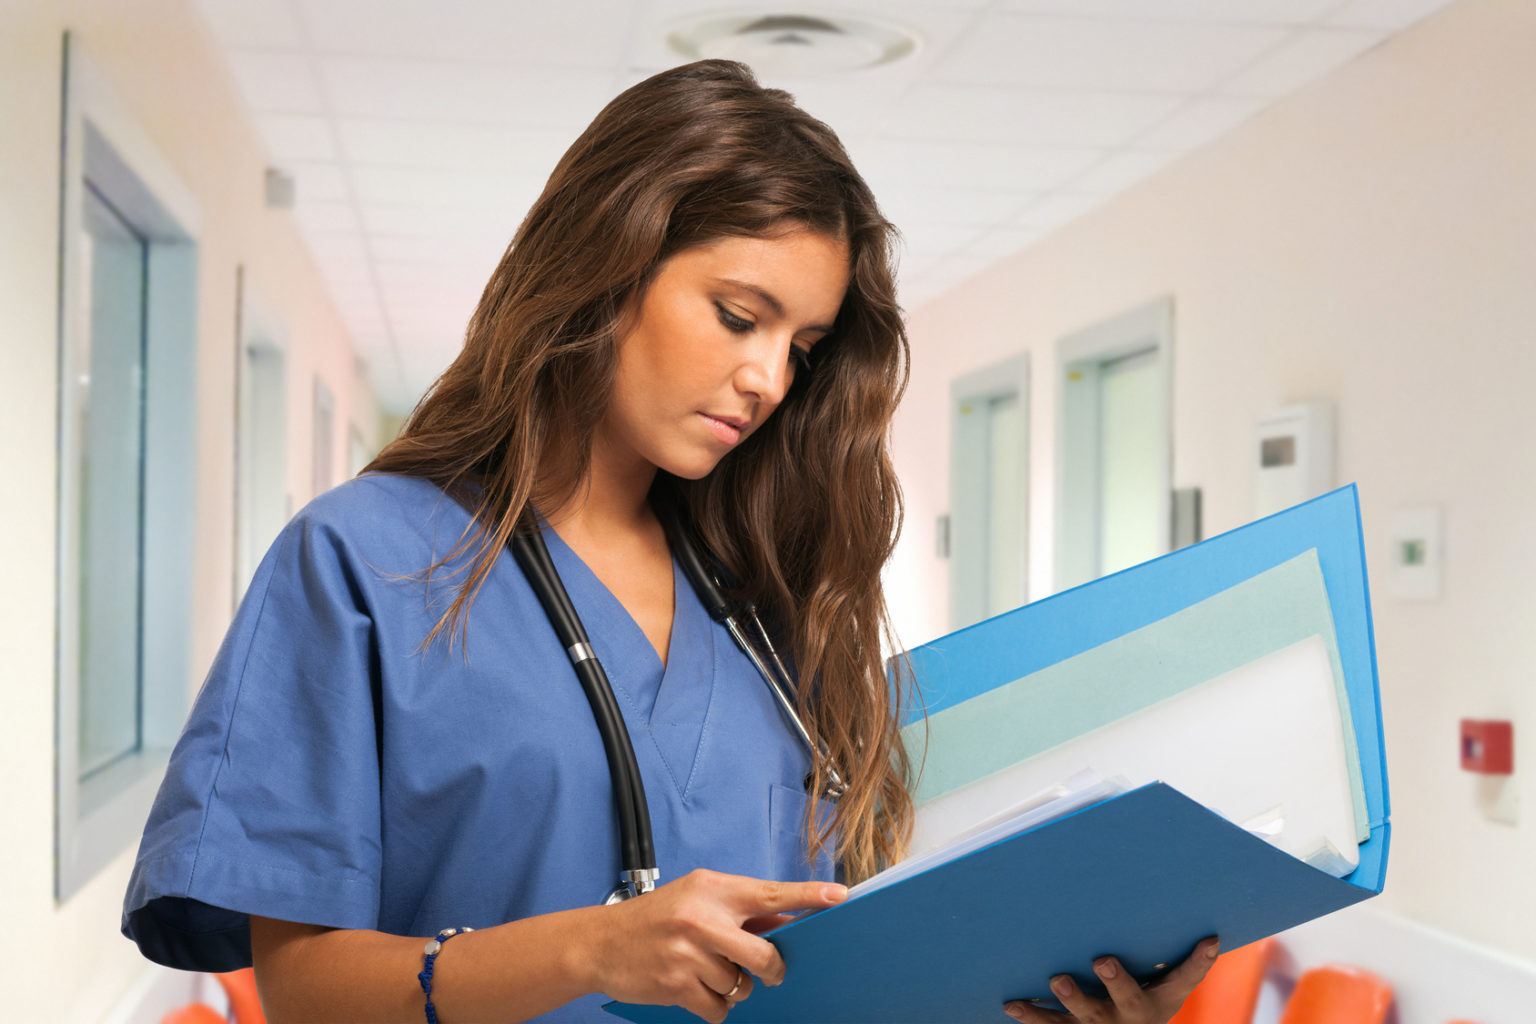 Medical assistant student studying